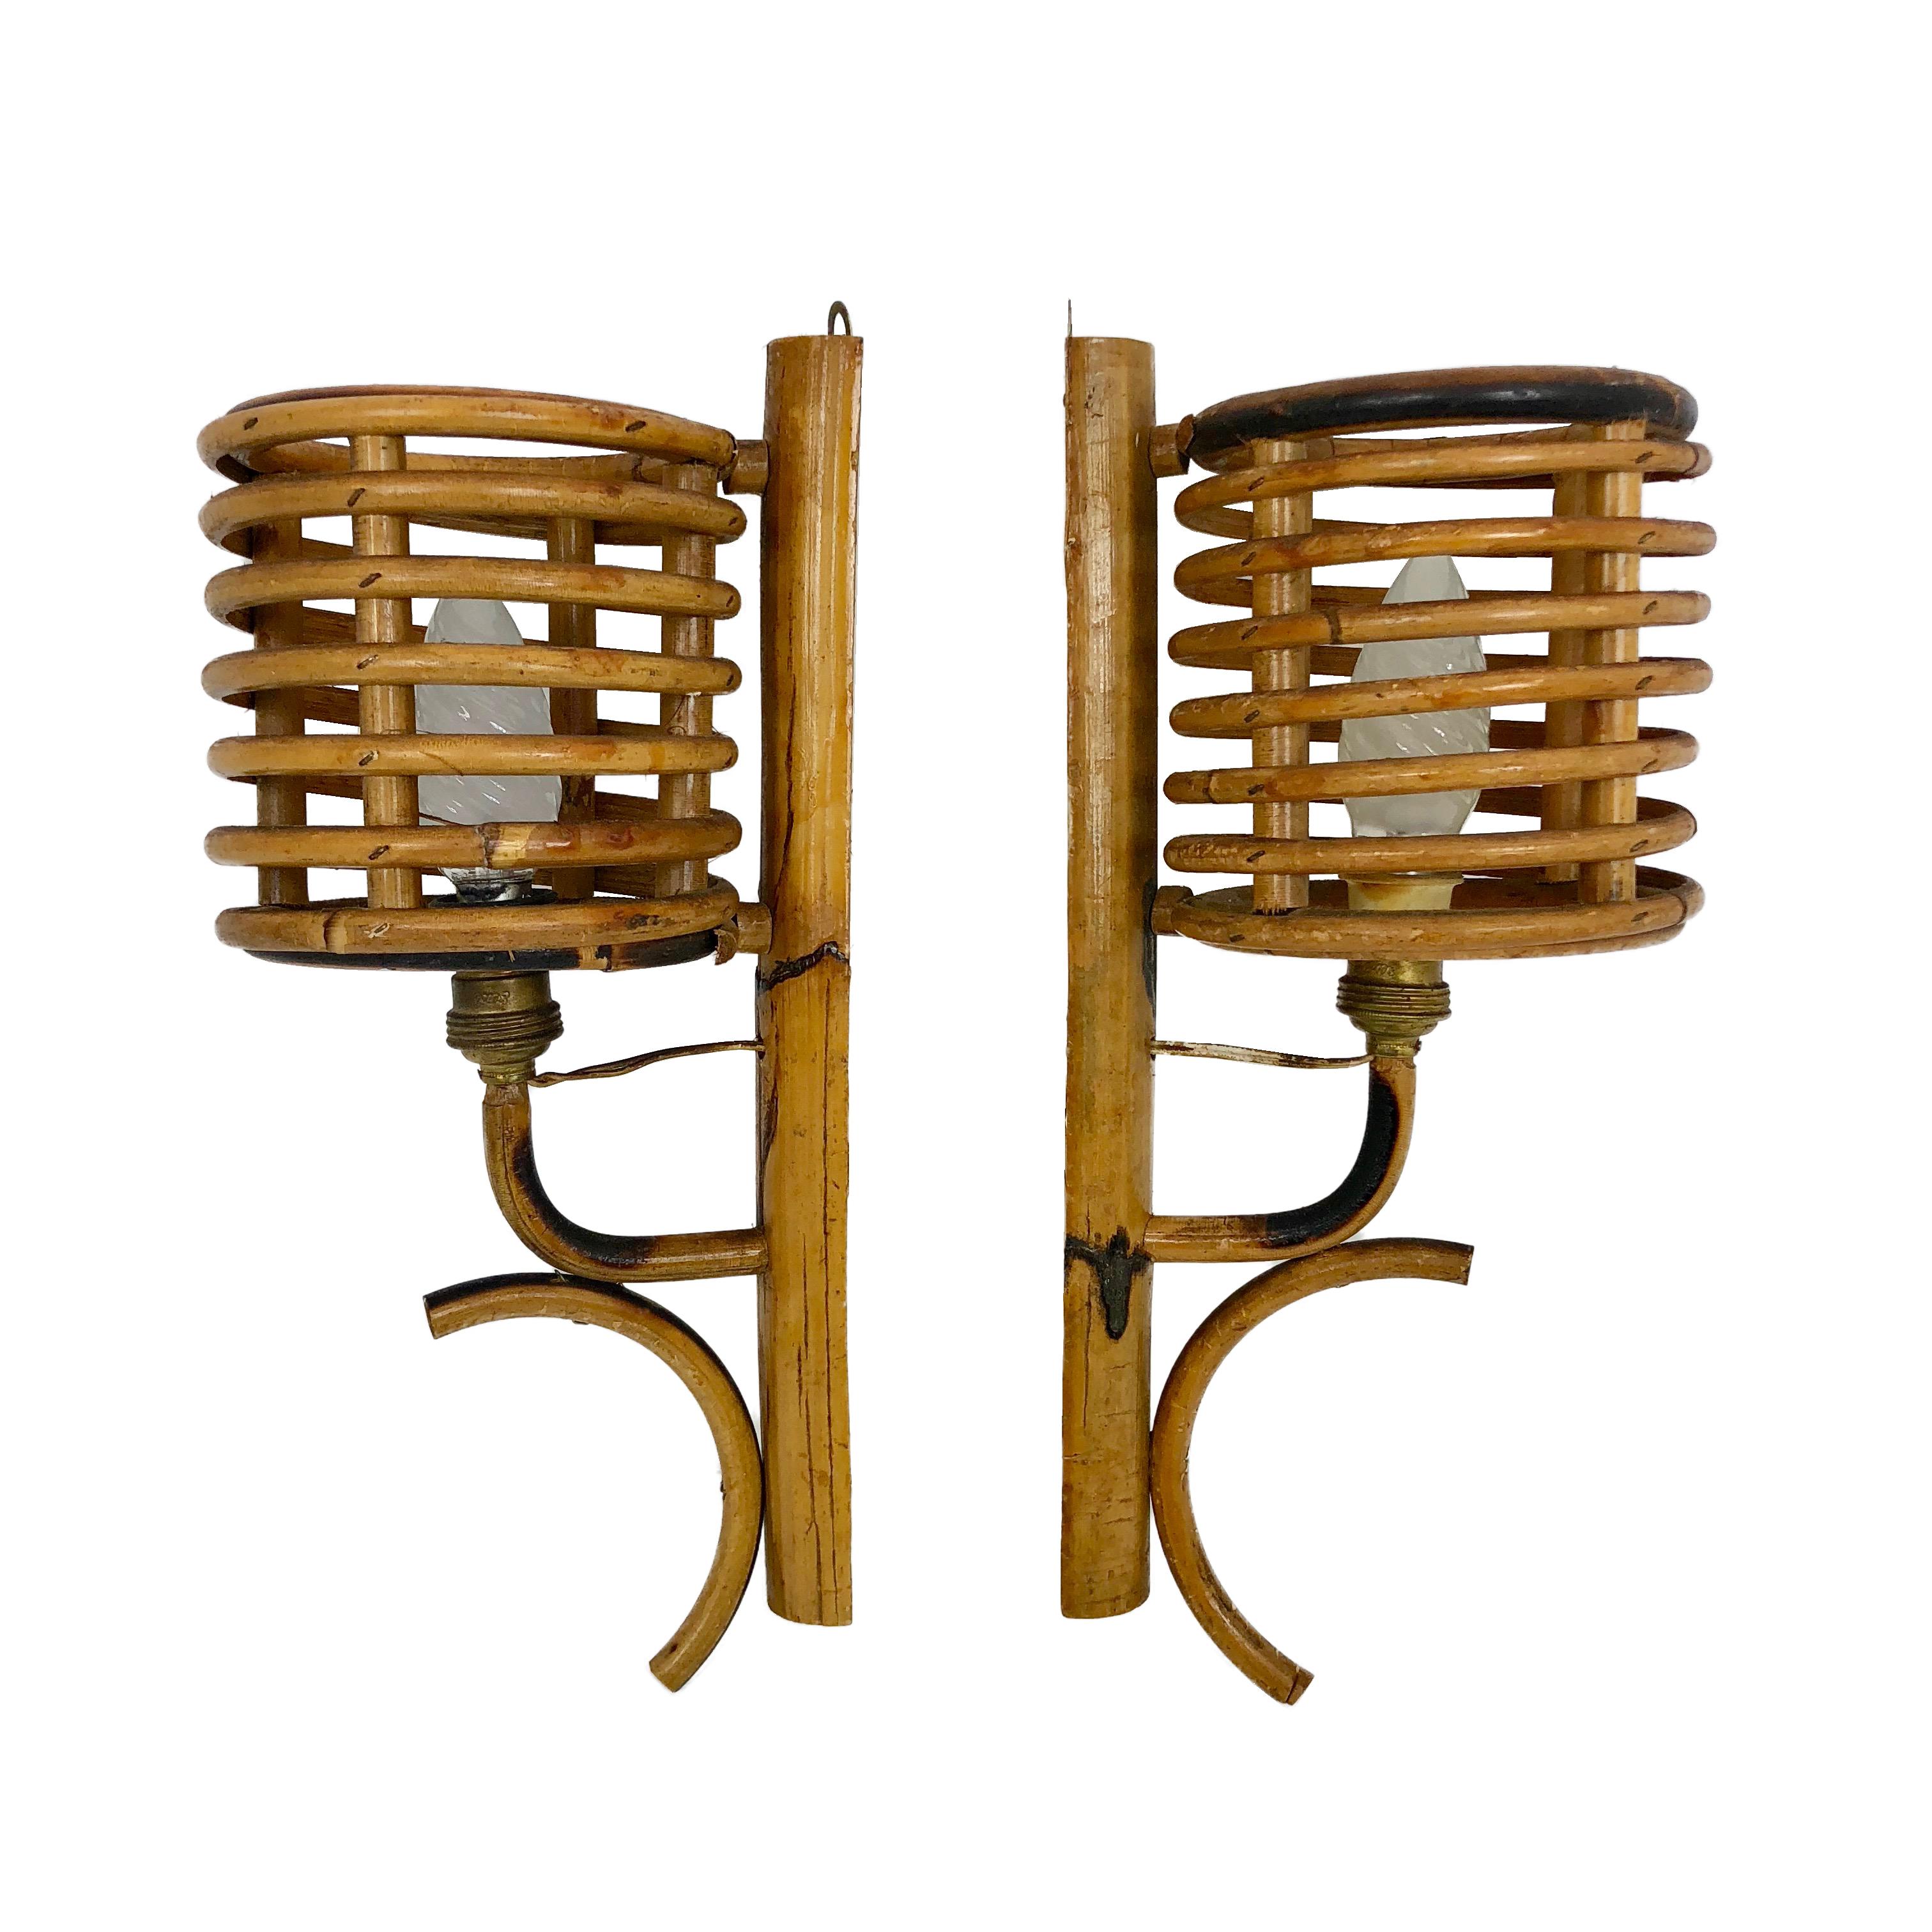 Pair of vintage bamboo sconces, Italy, 1950s.